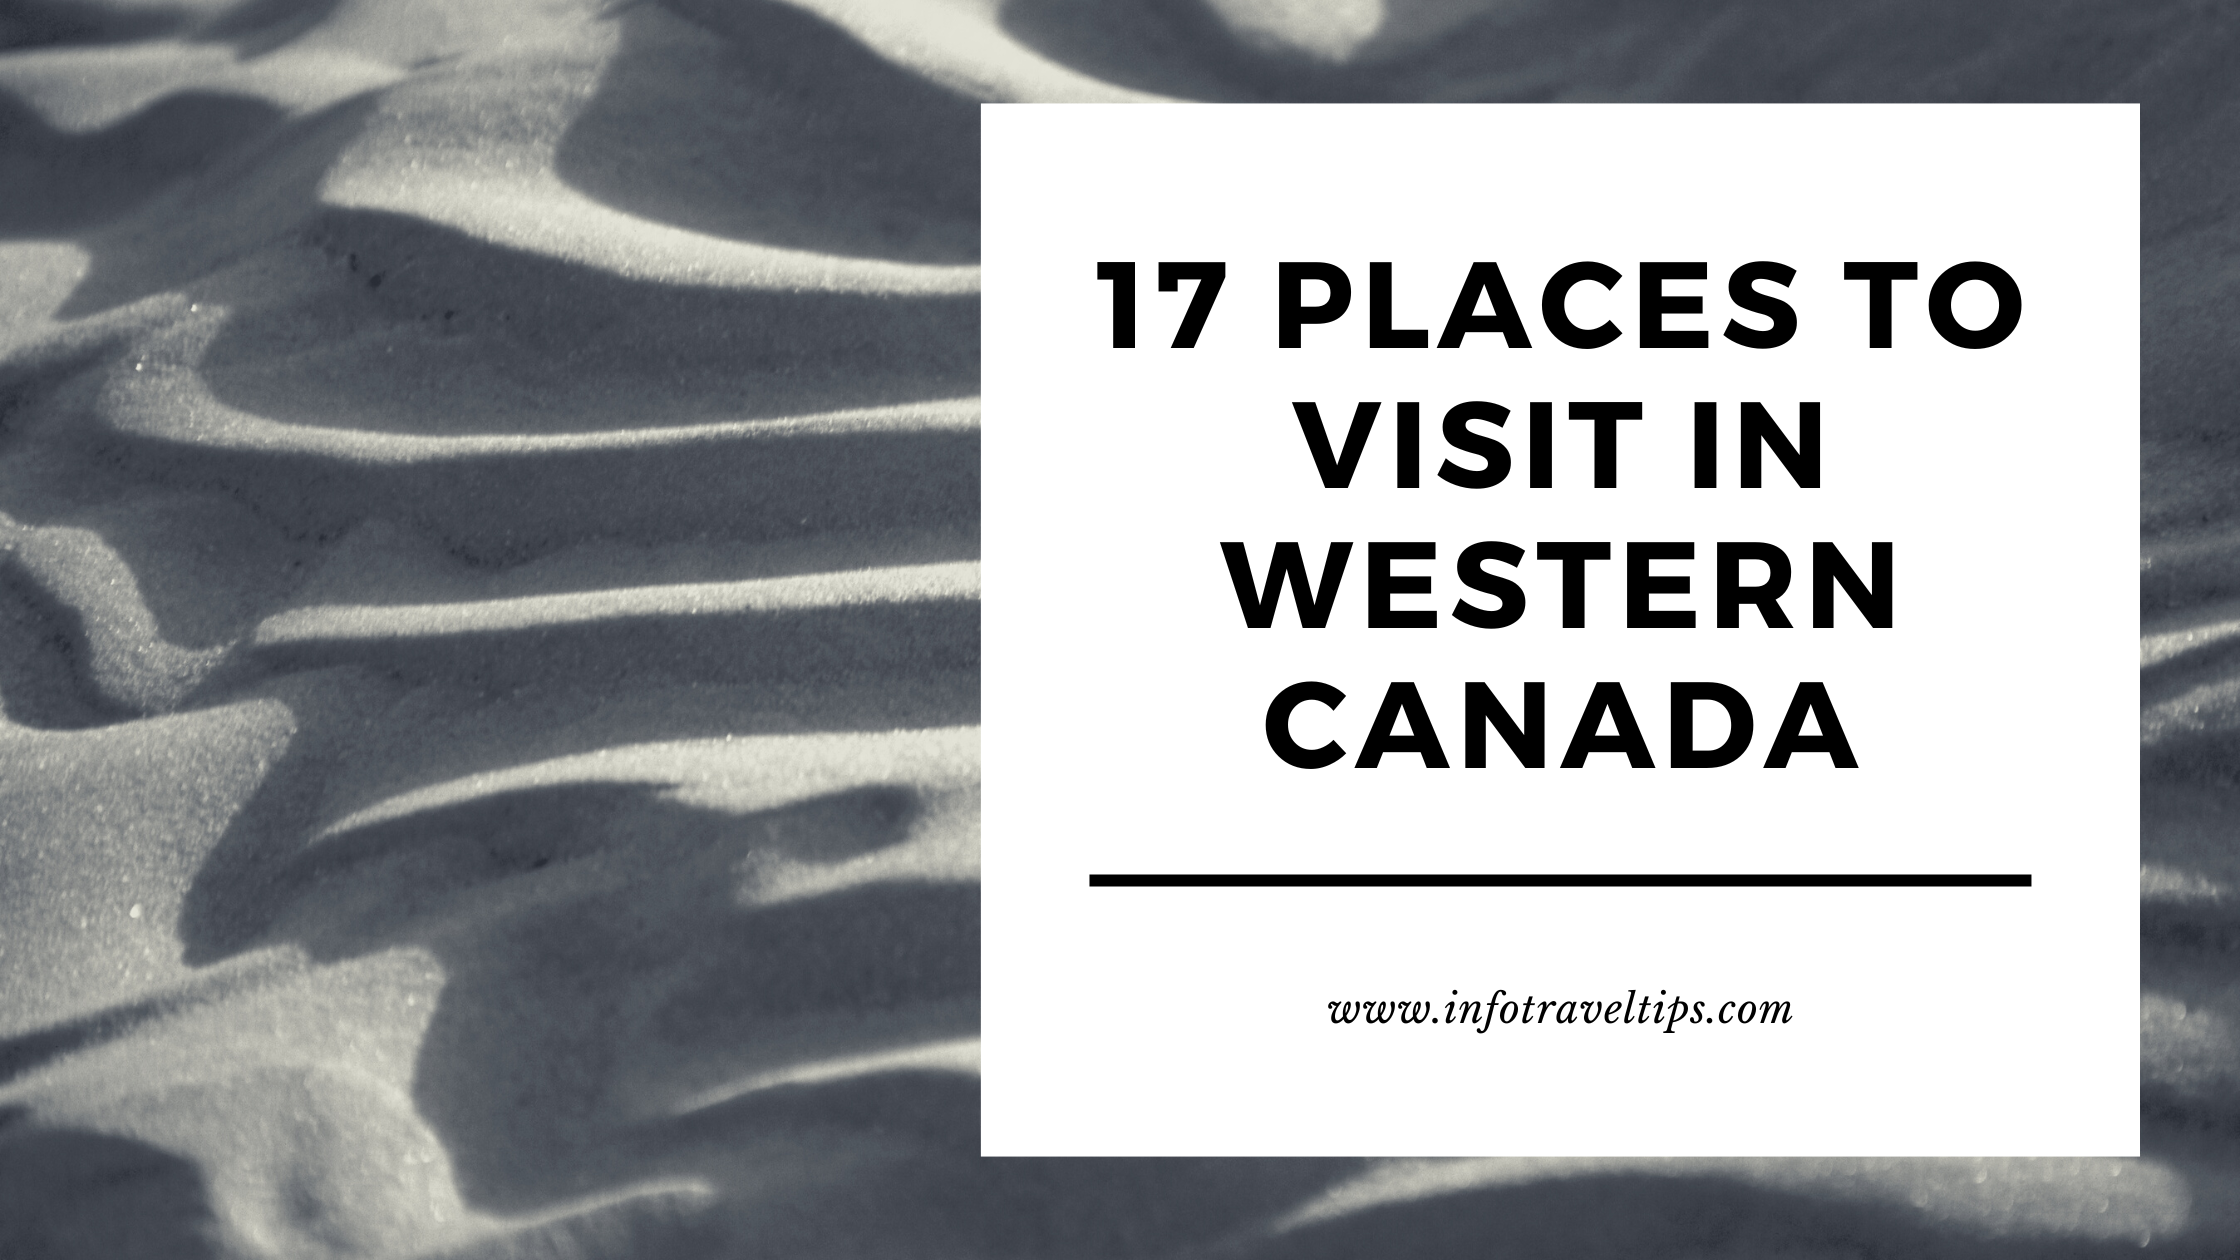 17 Places to Visit in Western Canada